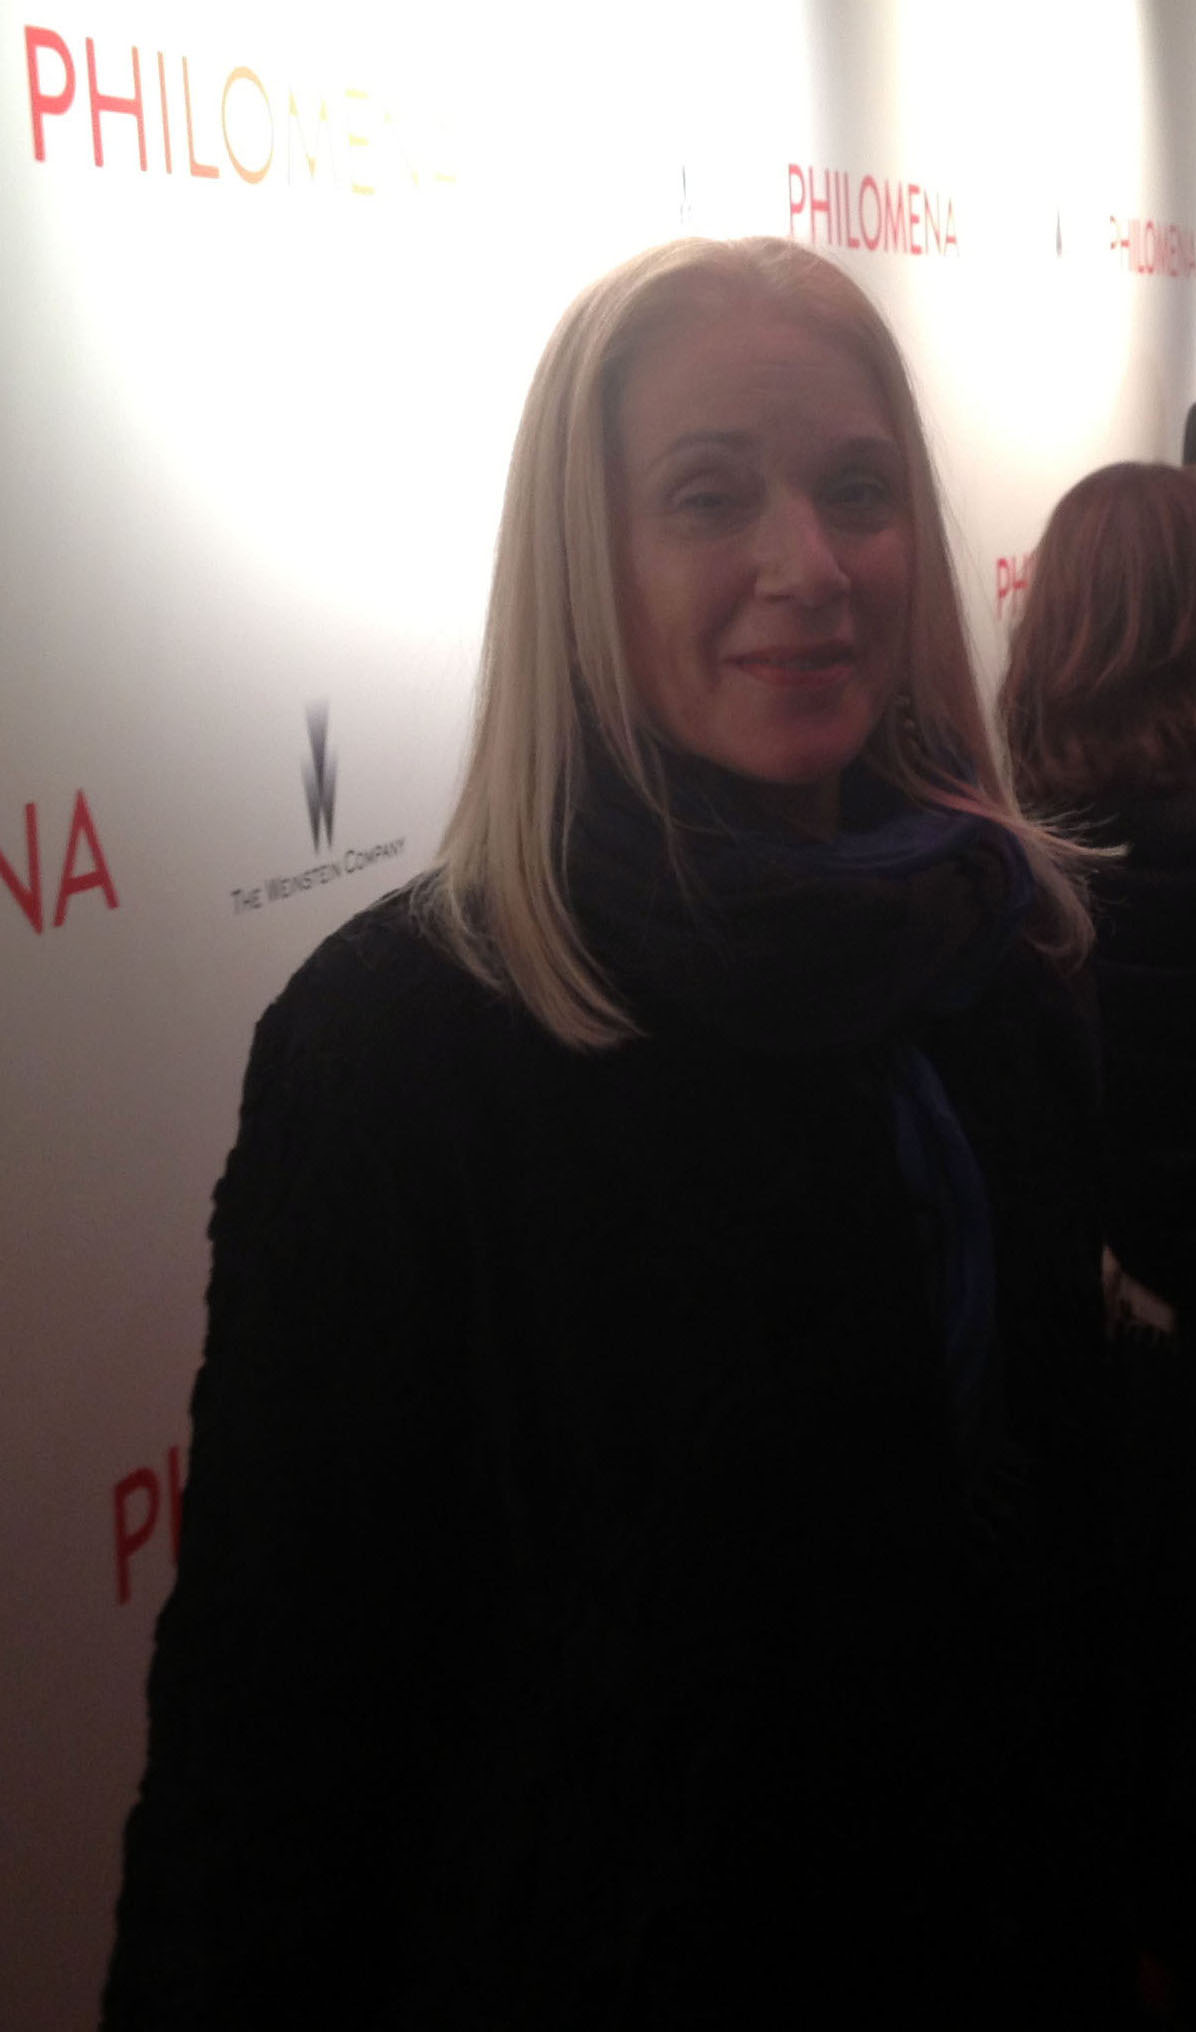 Opening of Philomena at the Paris Theater in NYC.